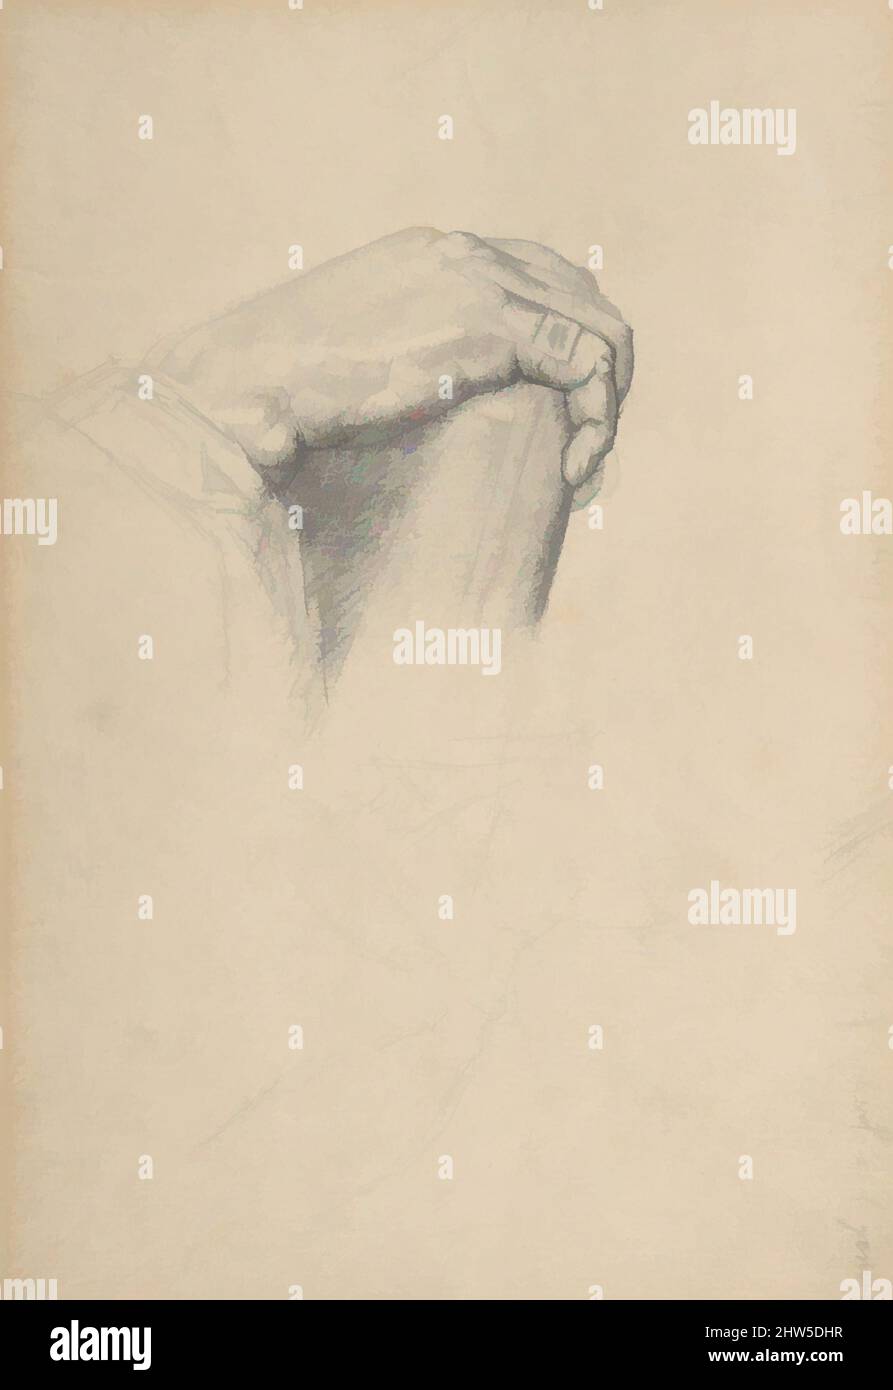 Art inspired by The Hand of Poussin, after Ingres, 1875–77, Graphite, 8 7/16 x 5 7/8 in. (21.4 x 14.9 cm), Drawings, Georges Seurat (French, Paris 1859–1891 Paris, Classic works modernized by Artotop with a splash of modernity. Shapes, color and value, eye-catching visual impact on art. Emotions through freedom of artworks in a contemporary way. A timeless message pursuing a wildly creative new direction. Artists turning to the digital medium and creating the Artotop NFT Stock Photo